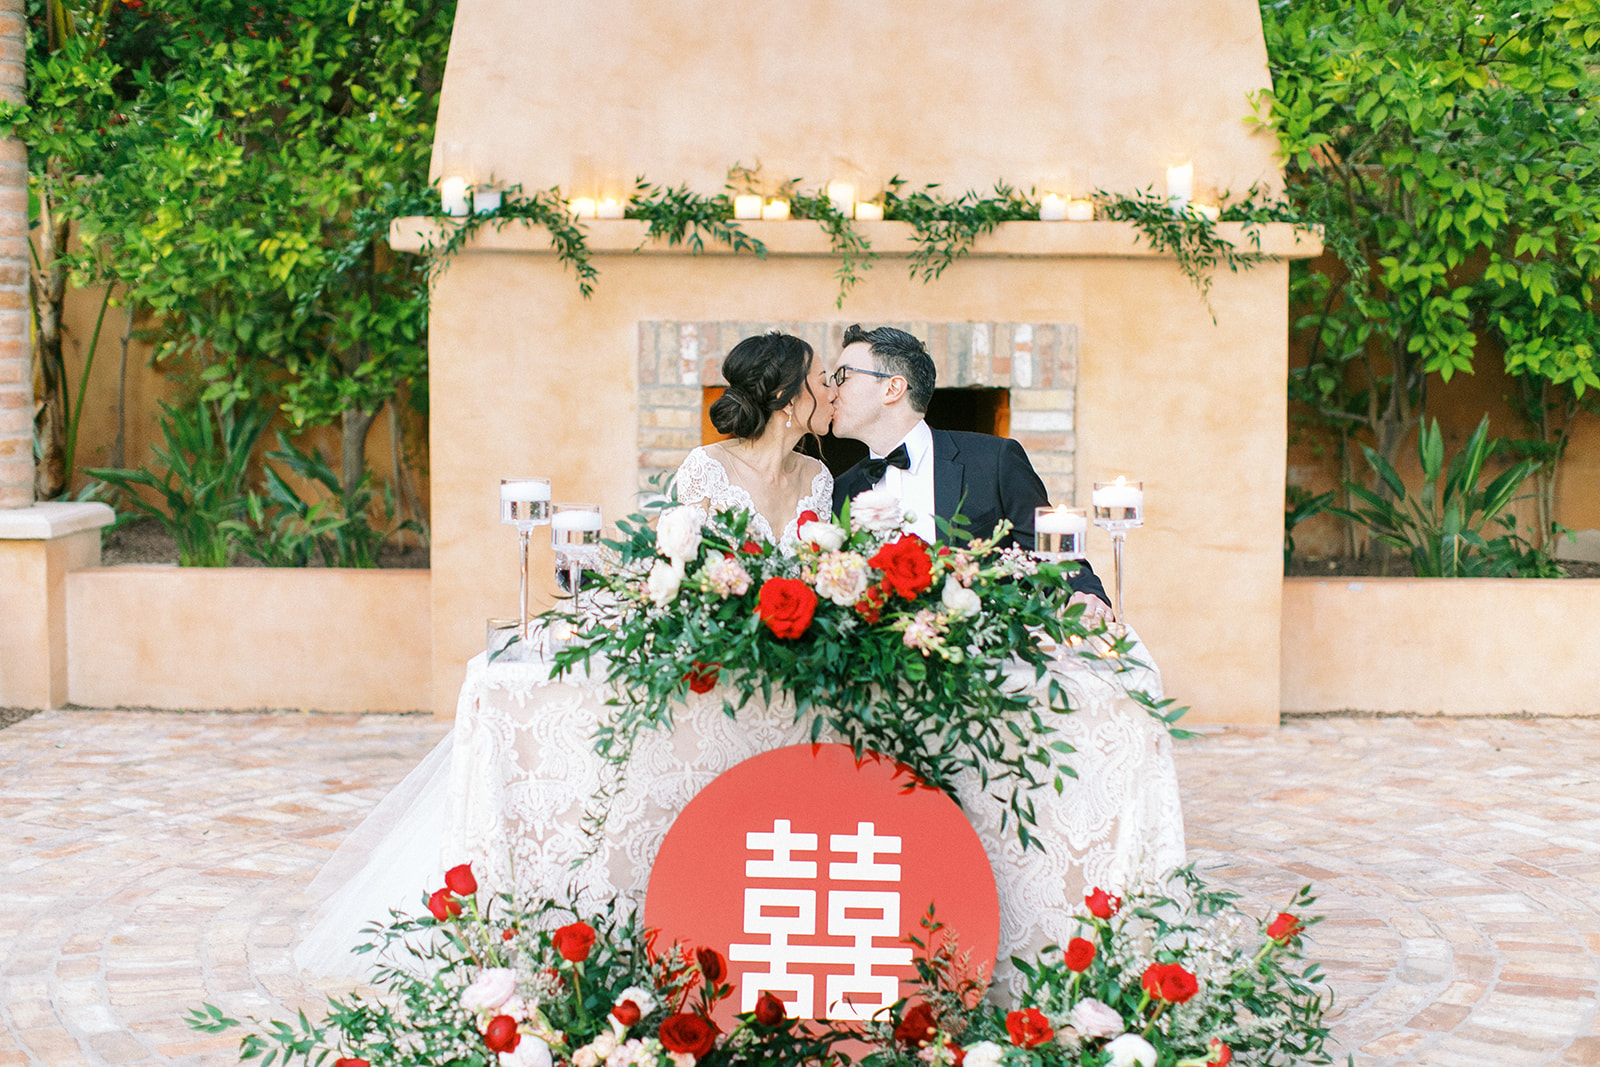 Bride and groom kissing at sweetheart table with floral and greenery arrangements and candles.